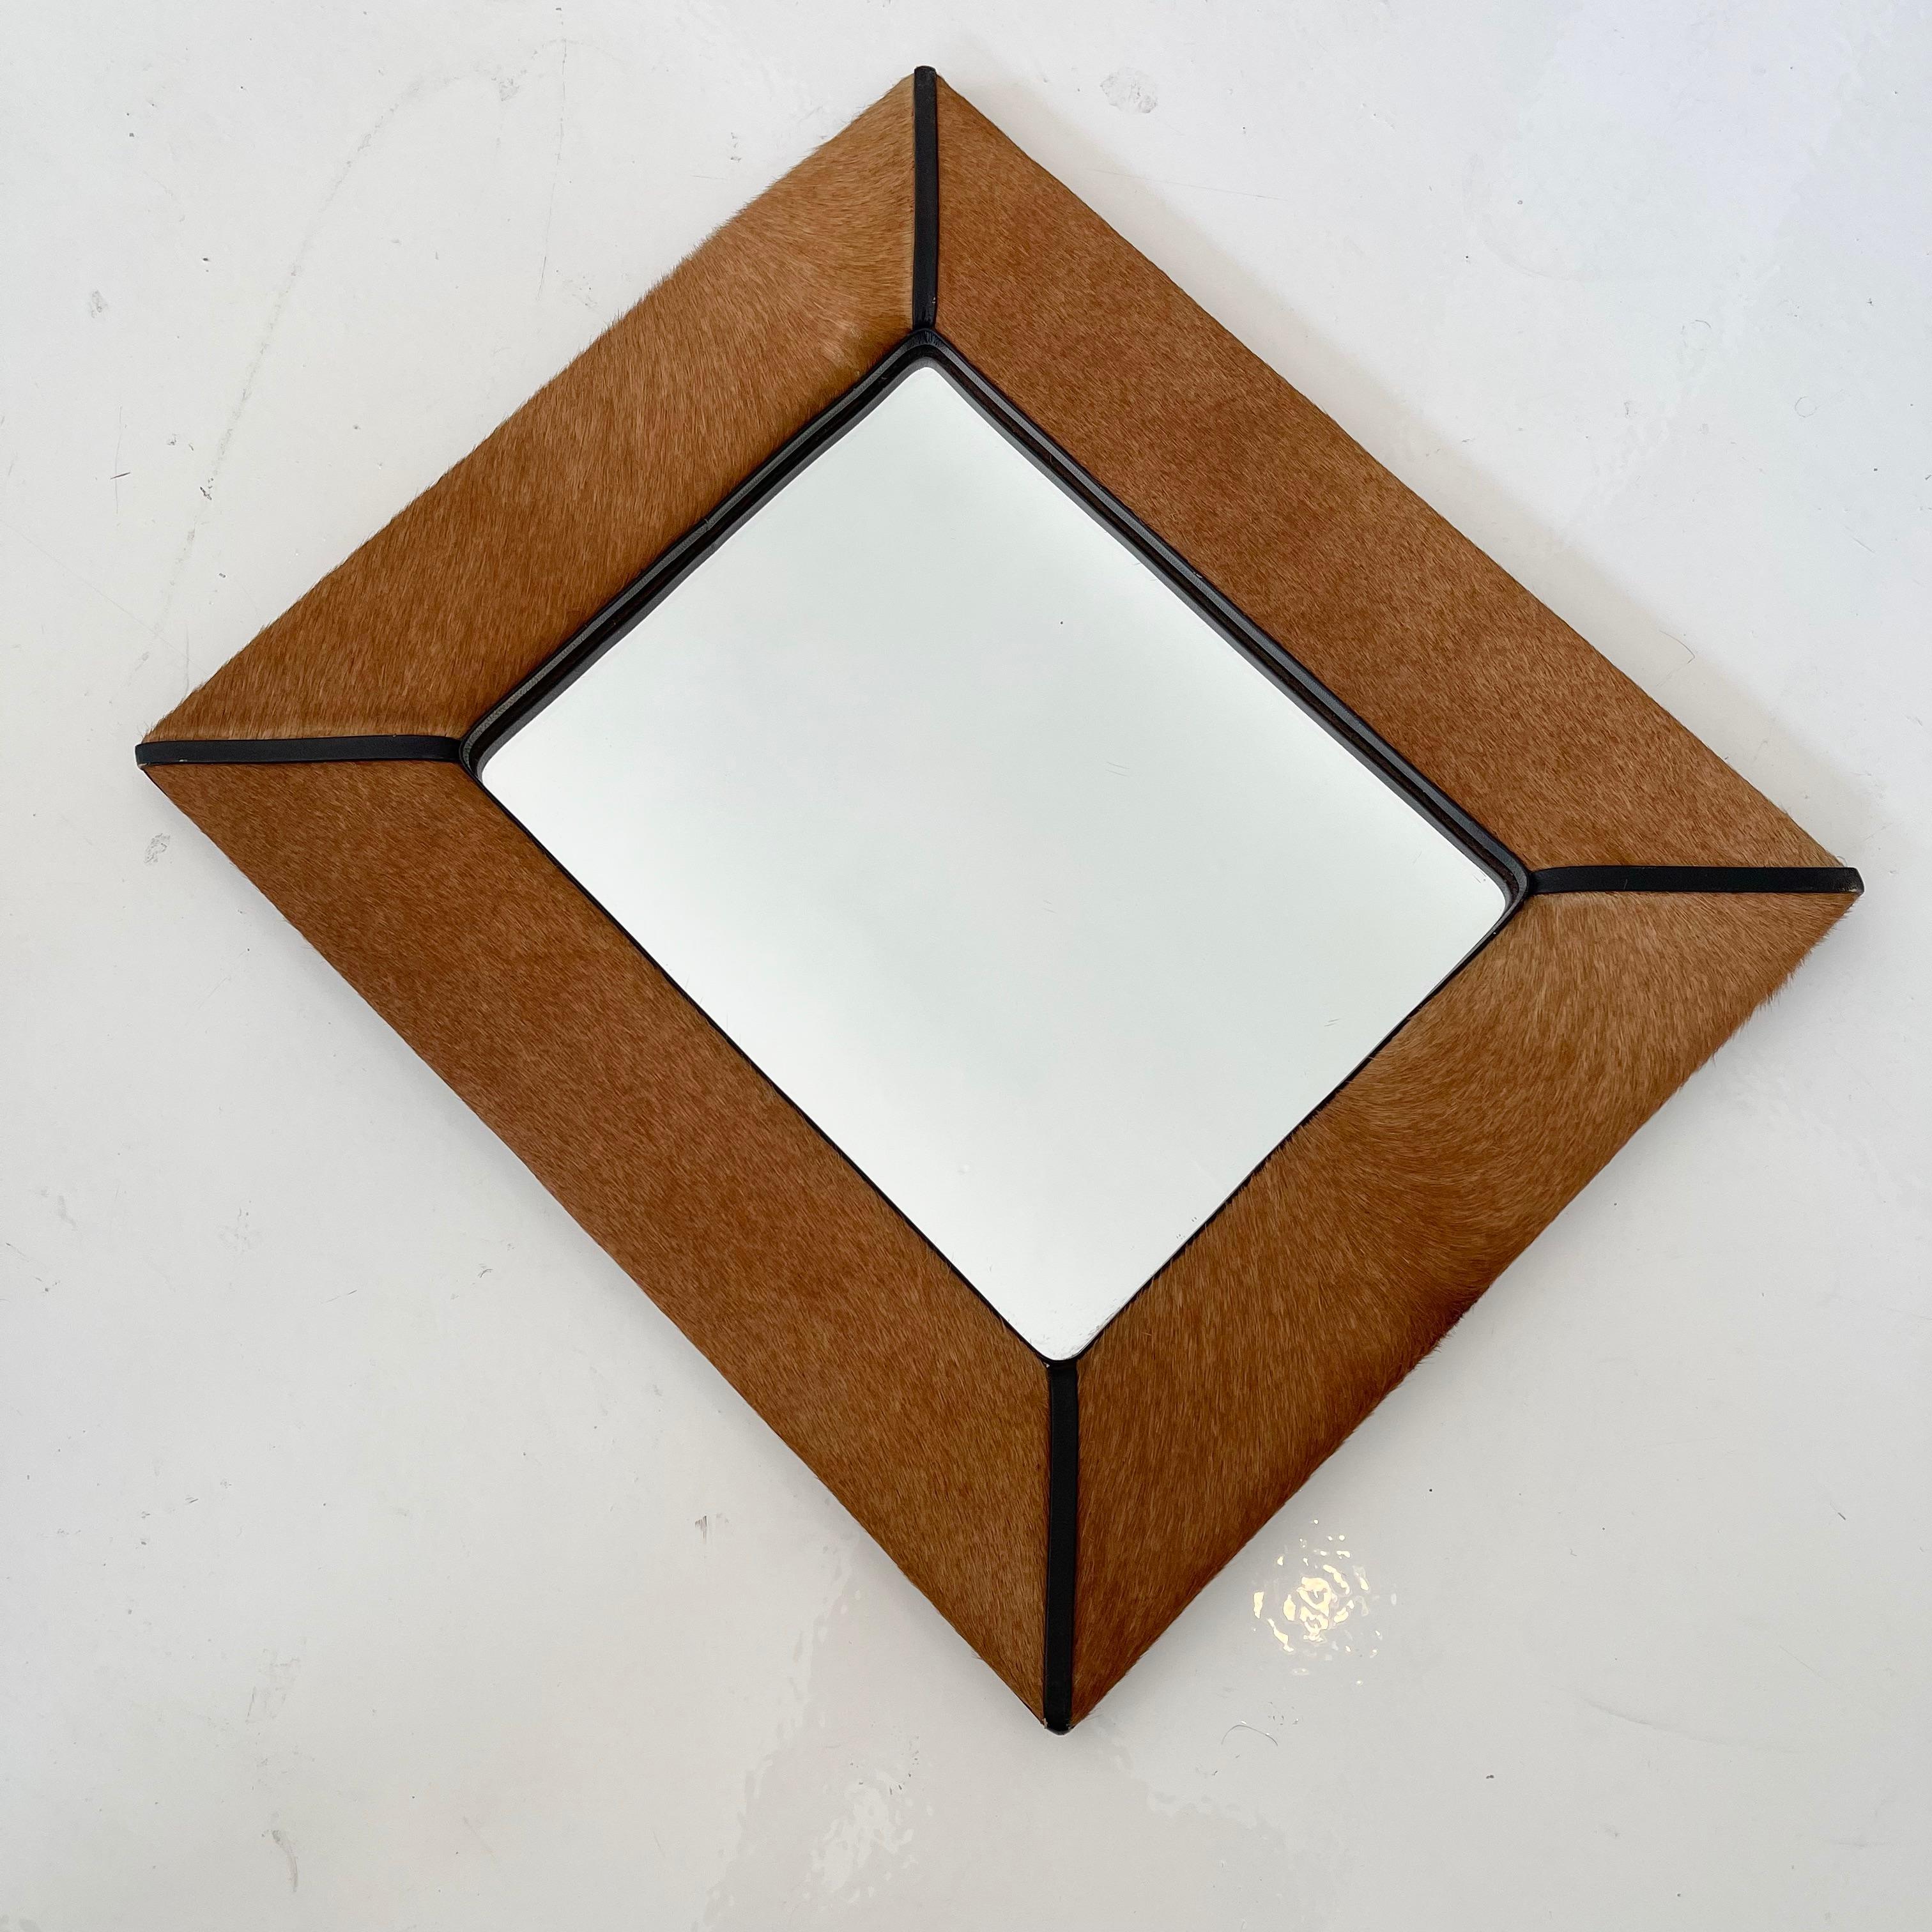 Handsome mirror made in France, circa 1960s. Pony hair with leather trim. Good vintage condition. Great design.